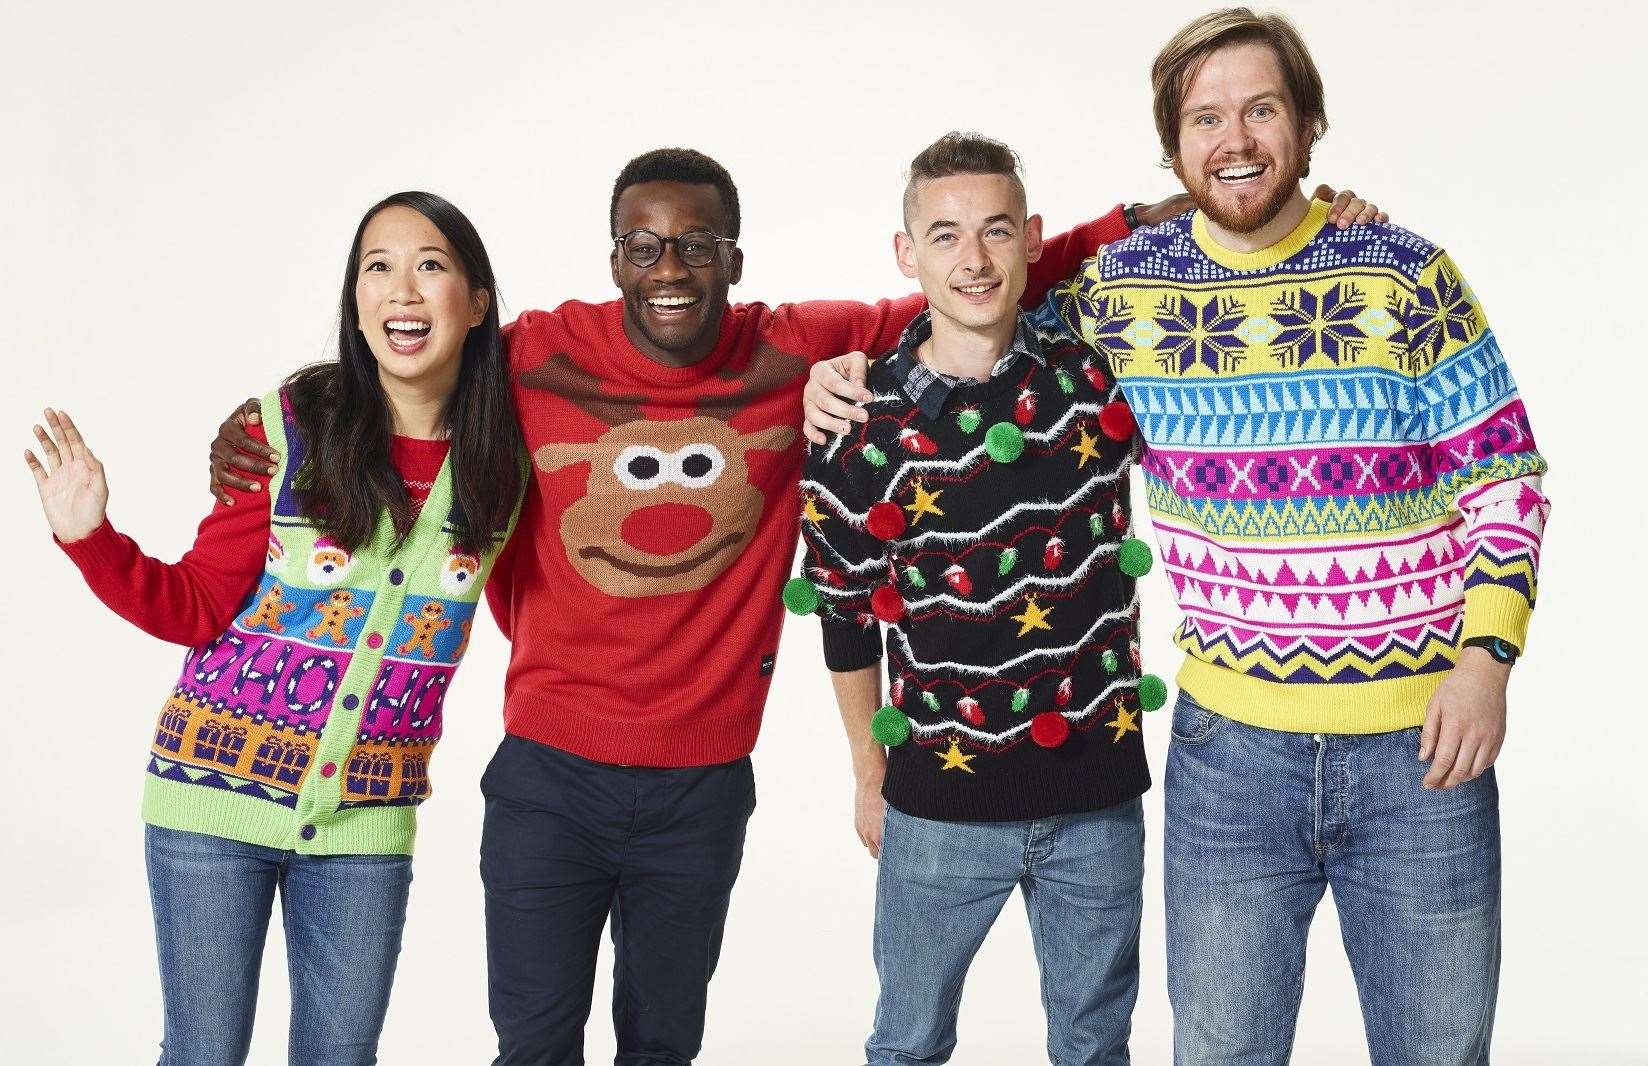 Christmas Jumper Day is taking place on Friday, December 13